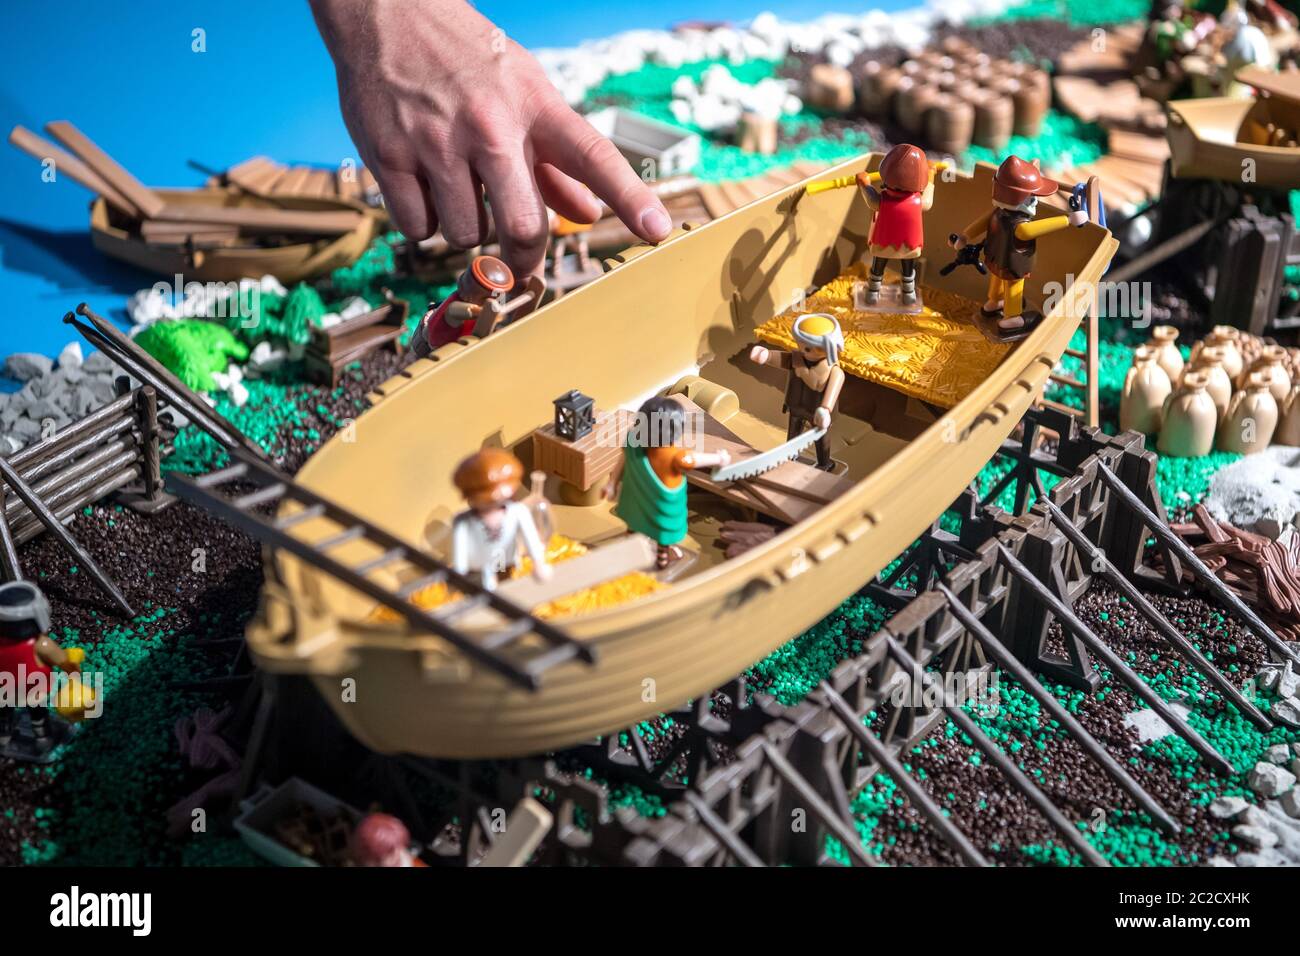 17 June 2020, Bremen, Bremerhaven: Oliver Schaffer, artist and Playmobil  collector, shows his work in the special exhibition "Cog meets Playmobil".  Staged Playmobil figures tell the story of the Bremen cog from